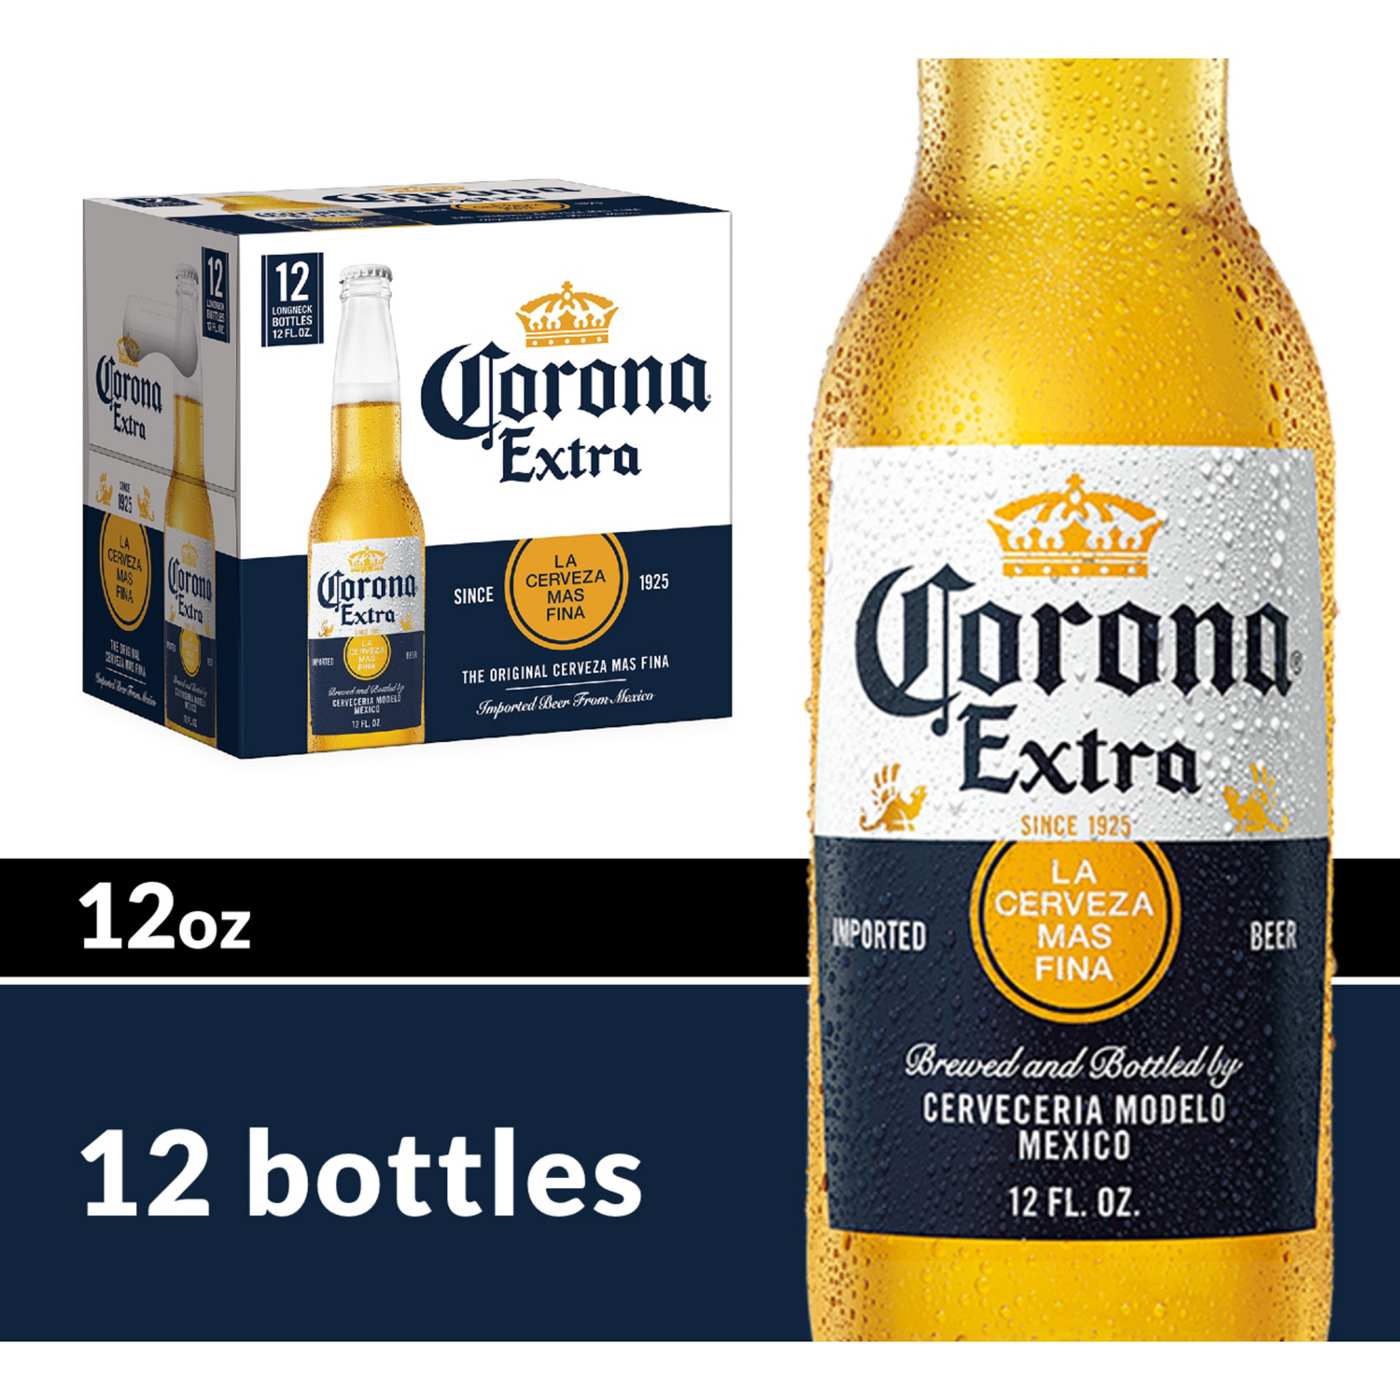 Corona Extra Mexican Lager Import Beer 12 oz Bottles, 12 pk; image 9 of 10